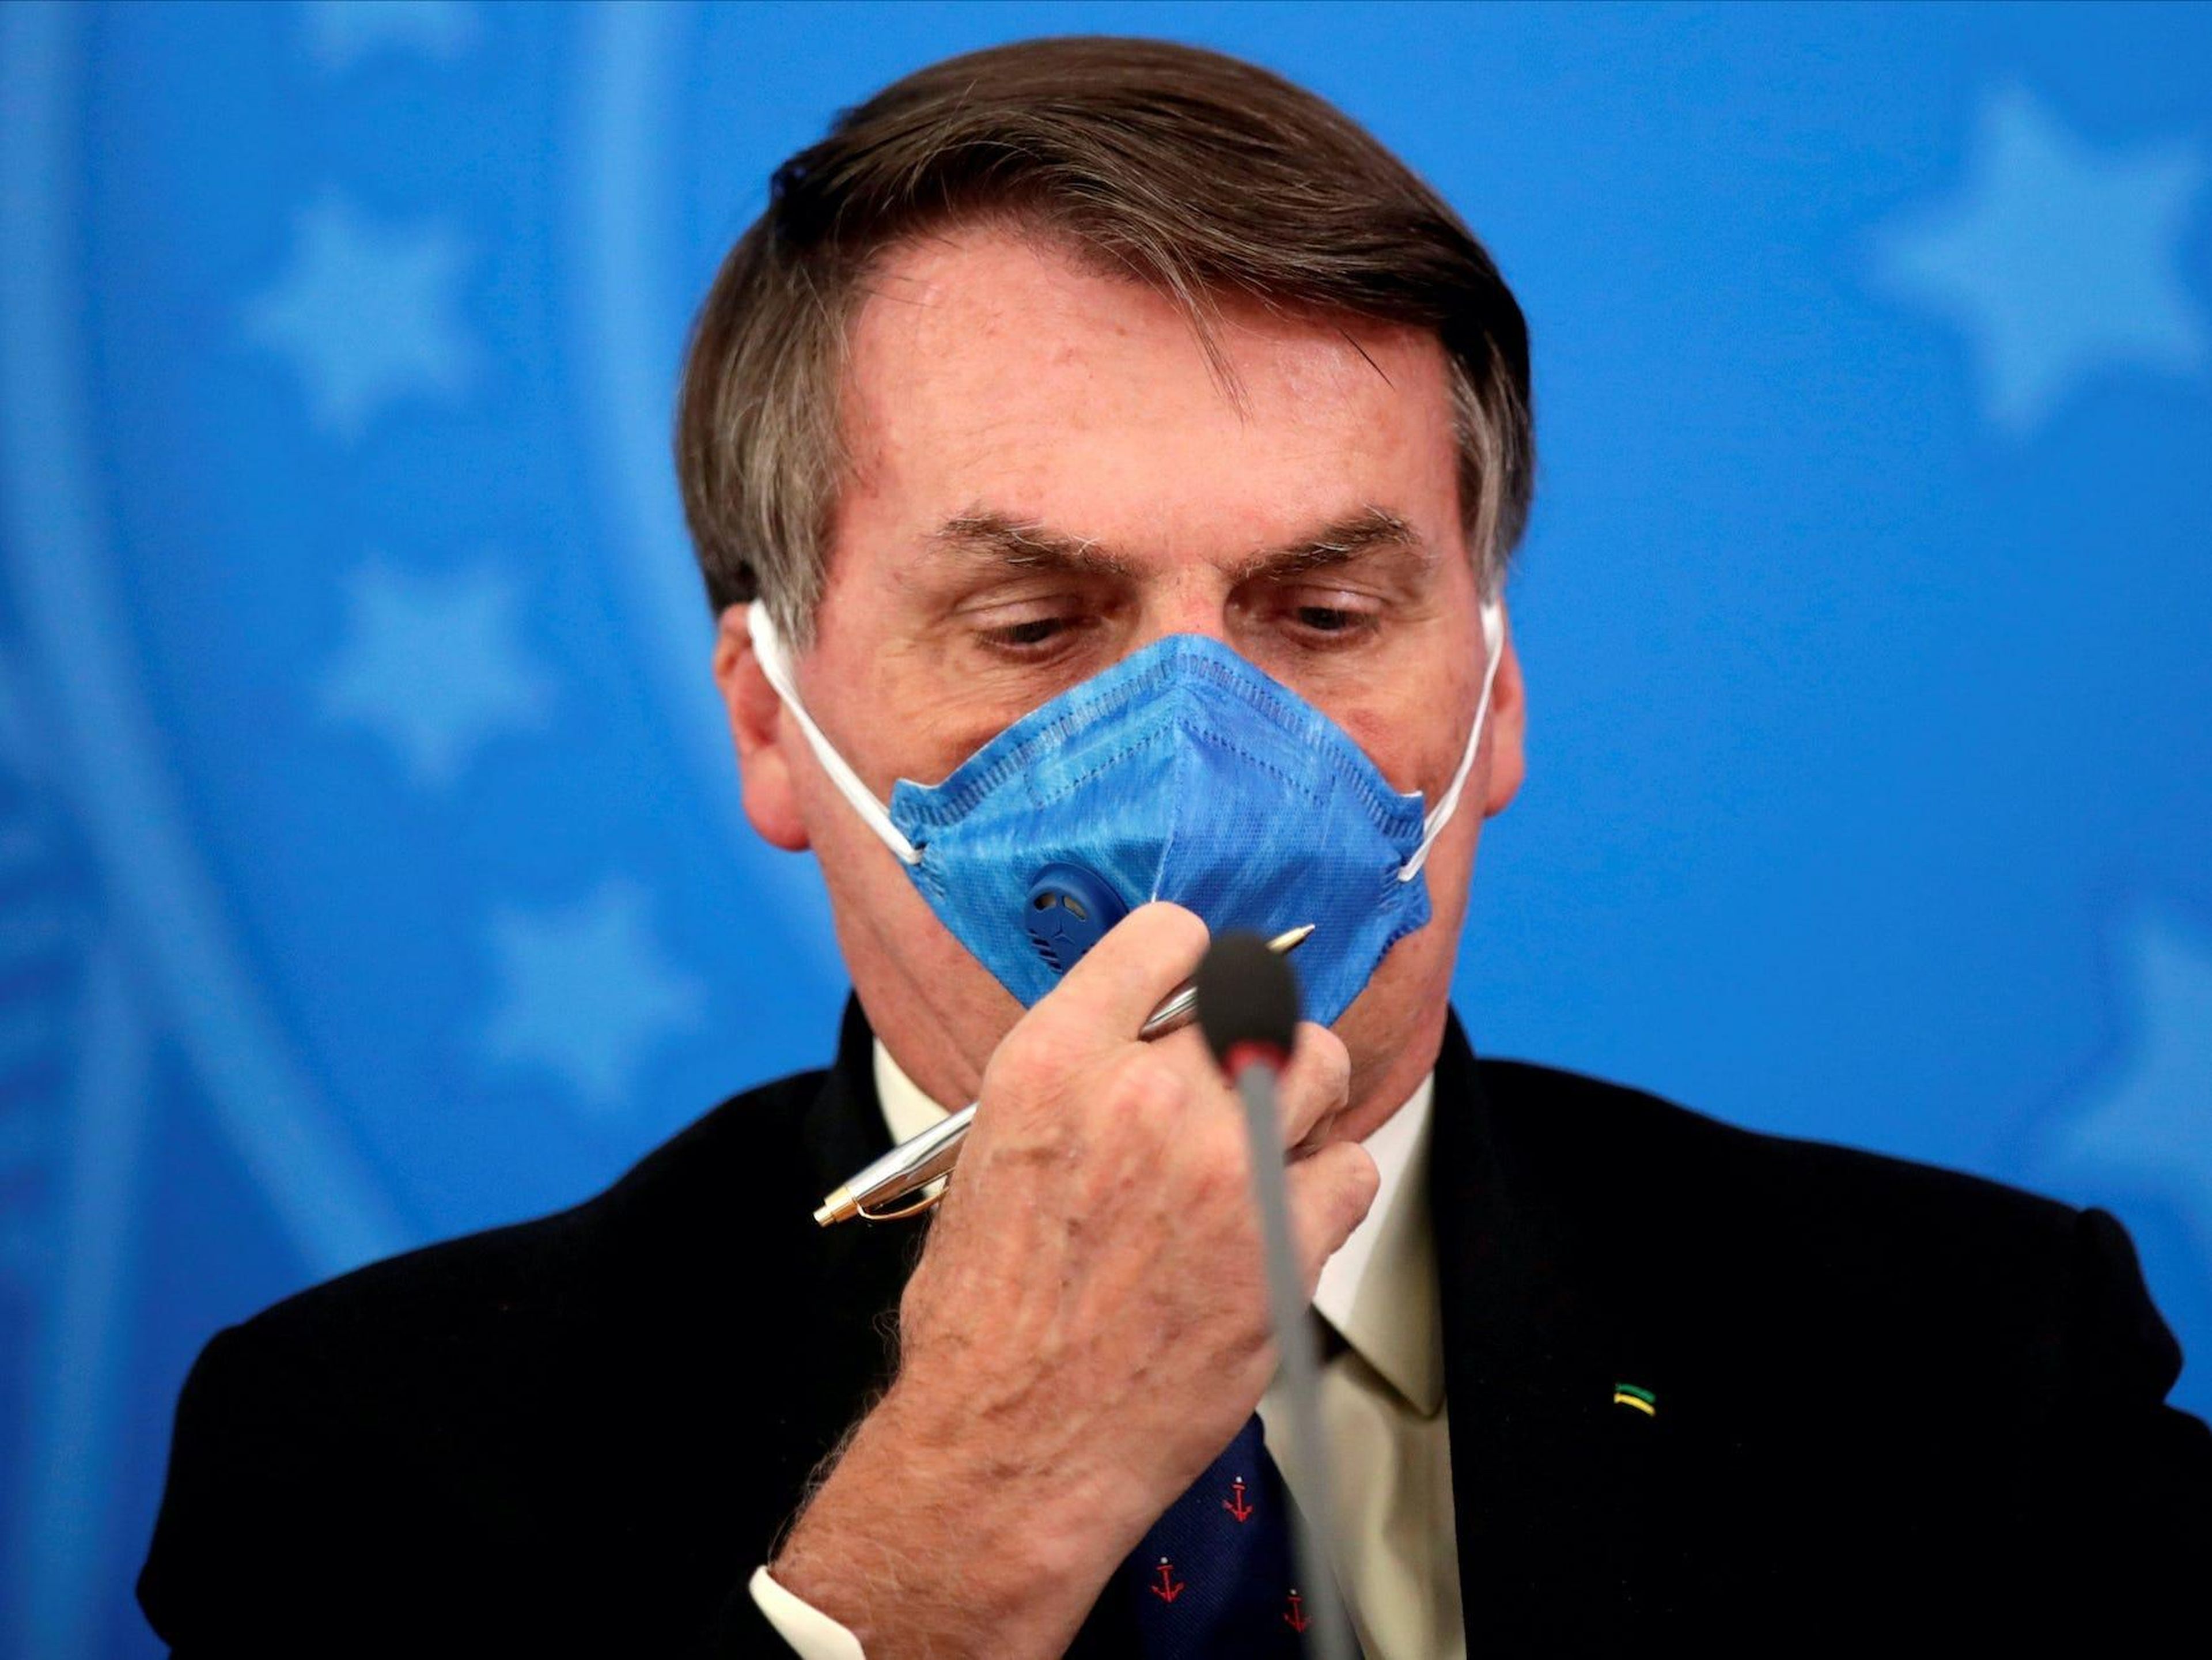 Brazil's President Jair Bolsonaro adjusts his protective face mask at a press statement during the coronavirus disease (COVID-19) outbreak in Brasilia, Brazil, March 20, 2020. Picture taken March 20, 2020. Ueslei Marcelino/Reuters